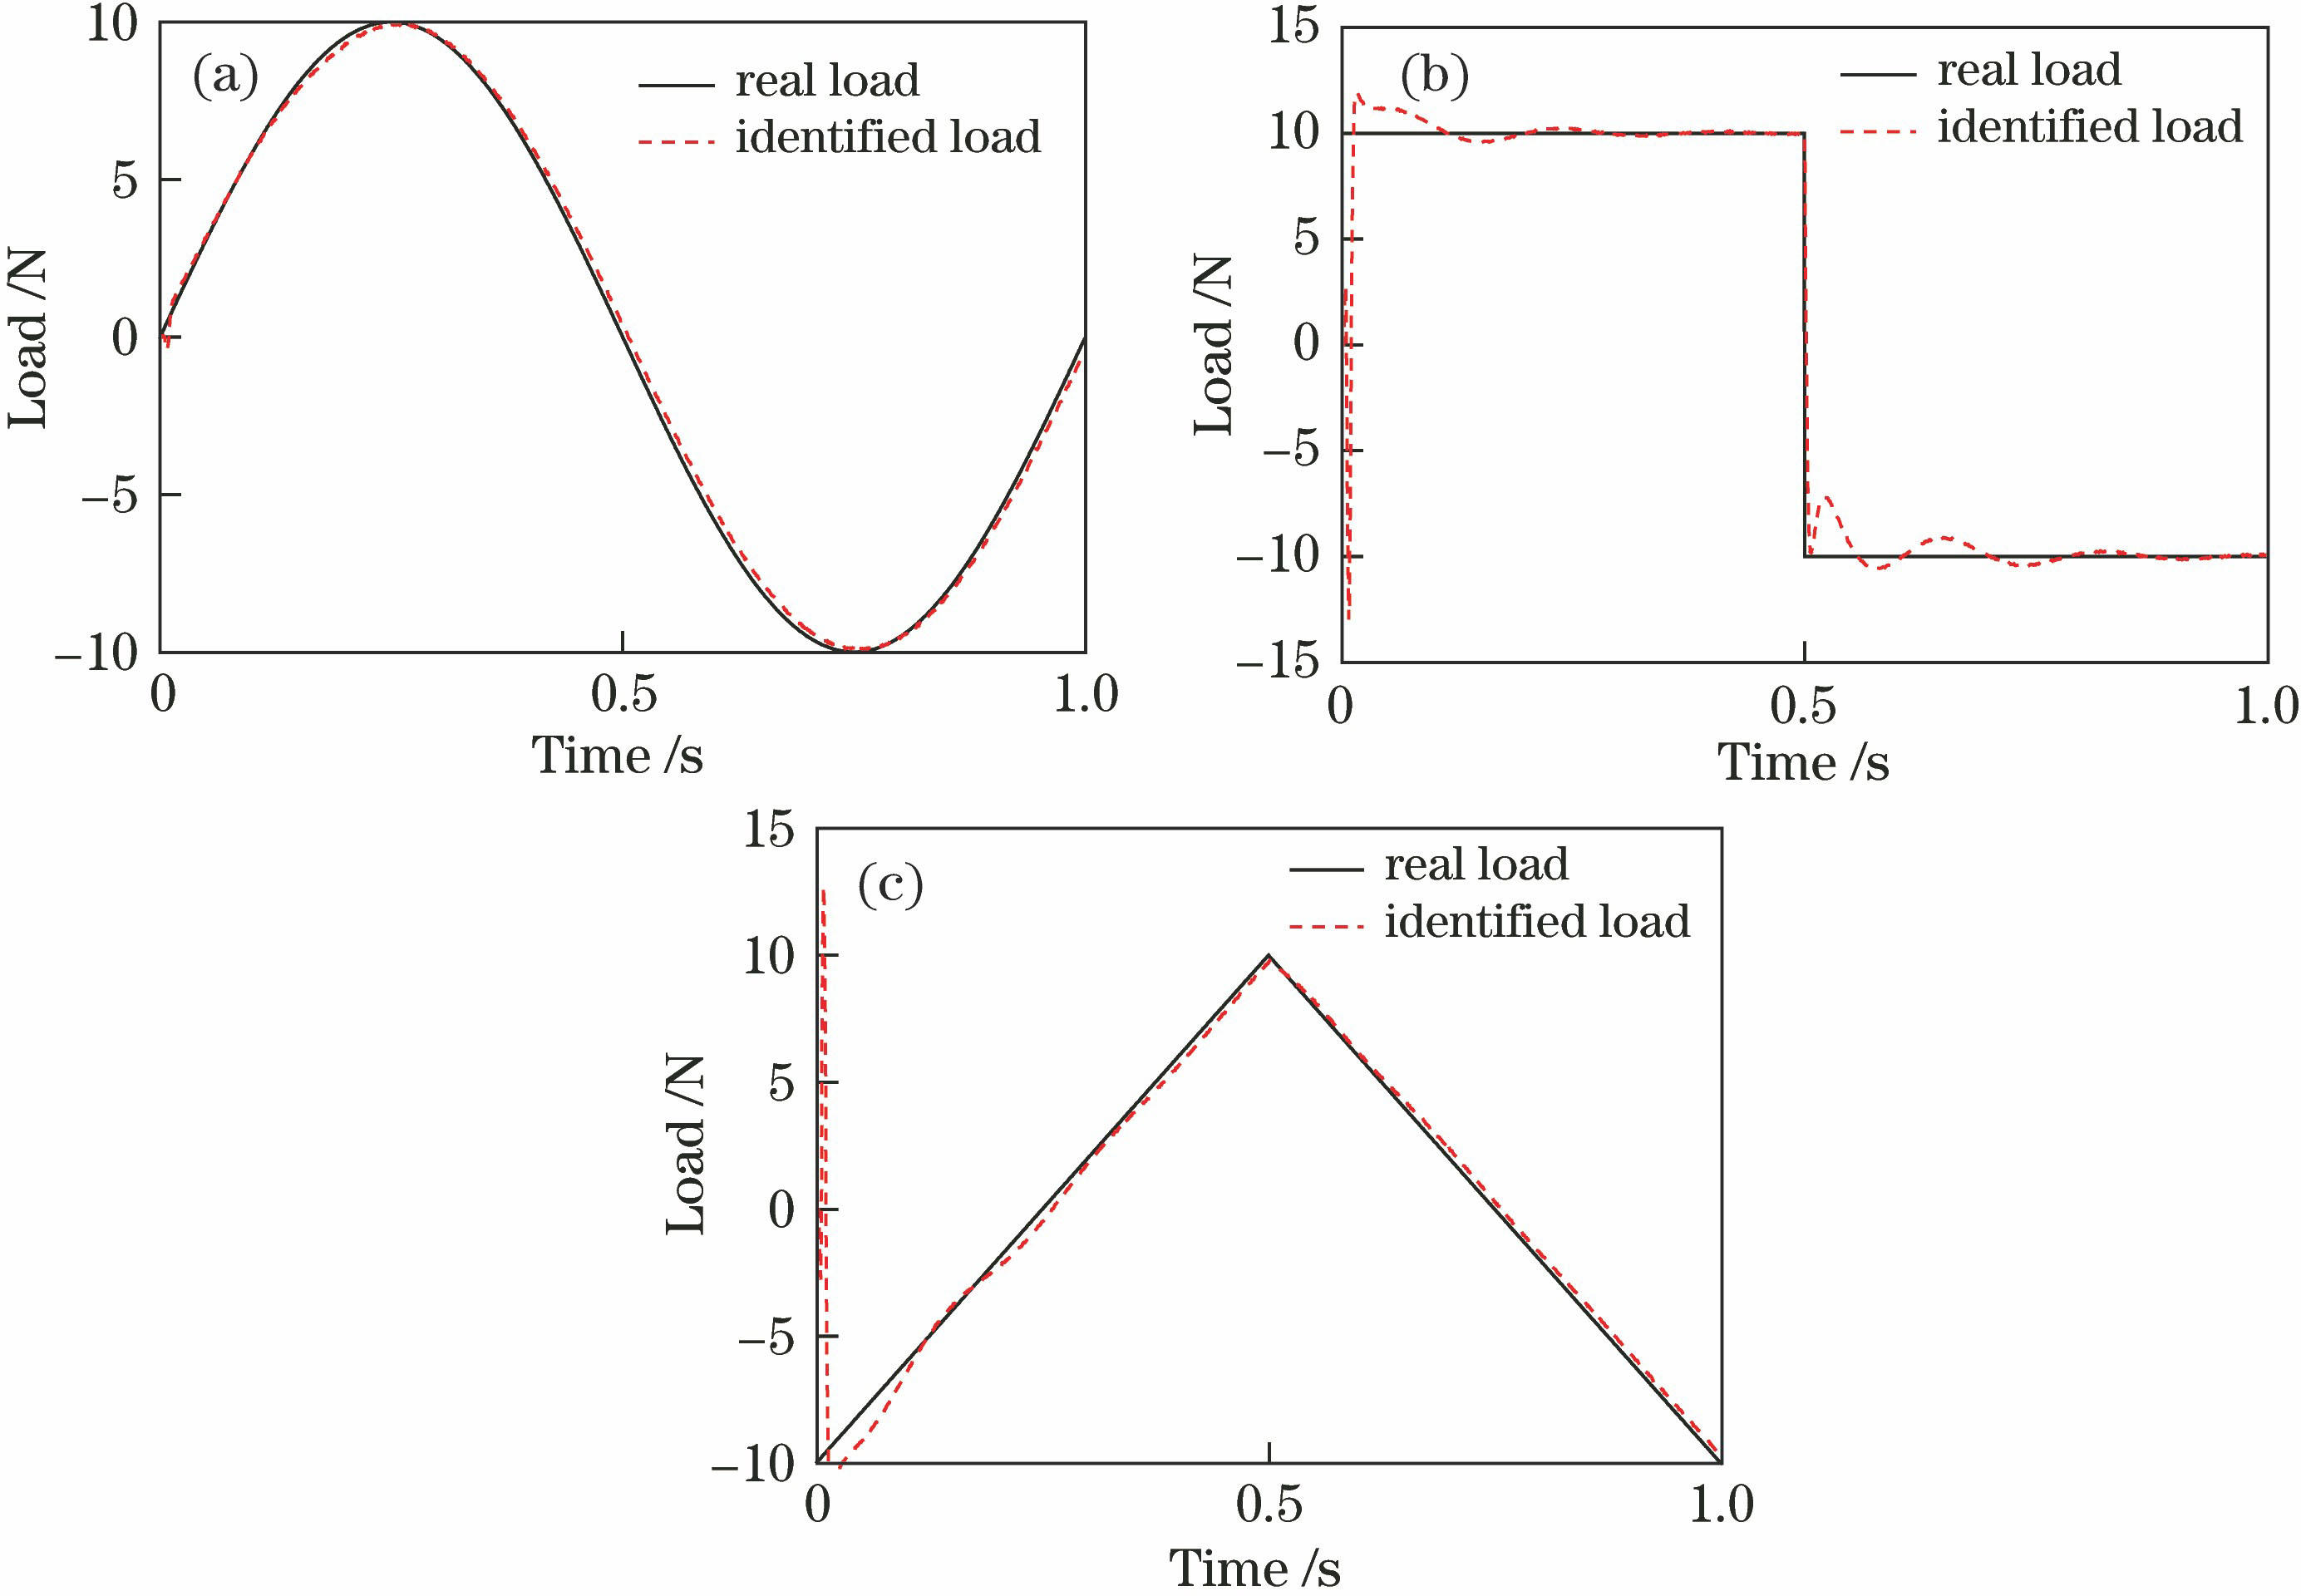 Identification results of sinusoidal load, square load, and triangular load under the conditions of Qw=1×10-8, σ=1×10-16, and 1 Hz